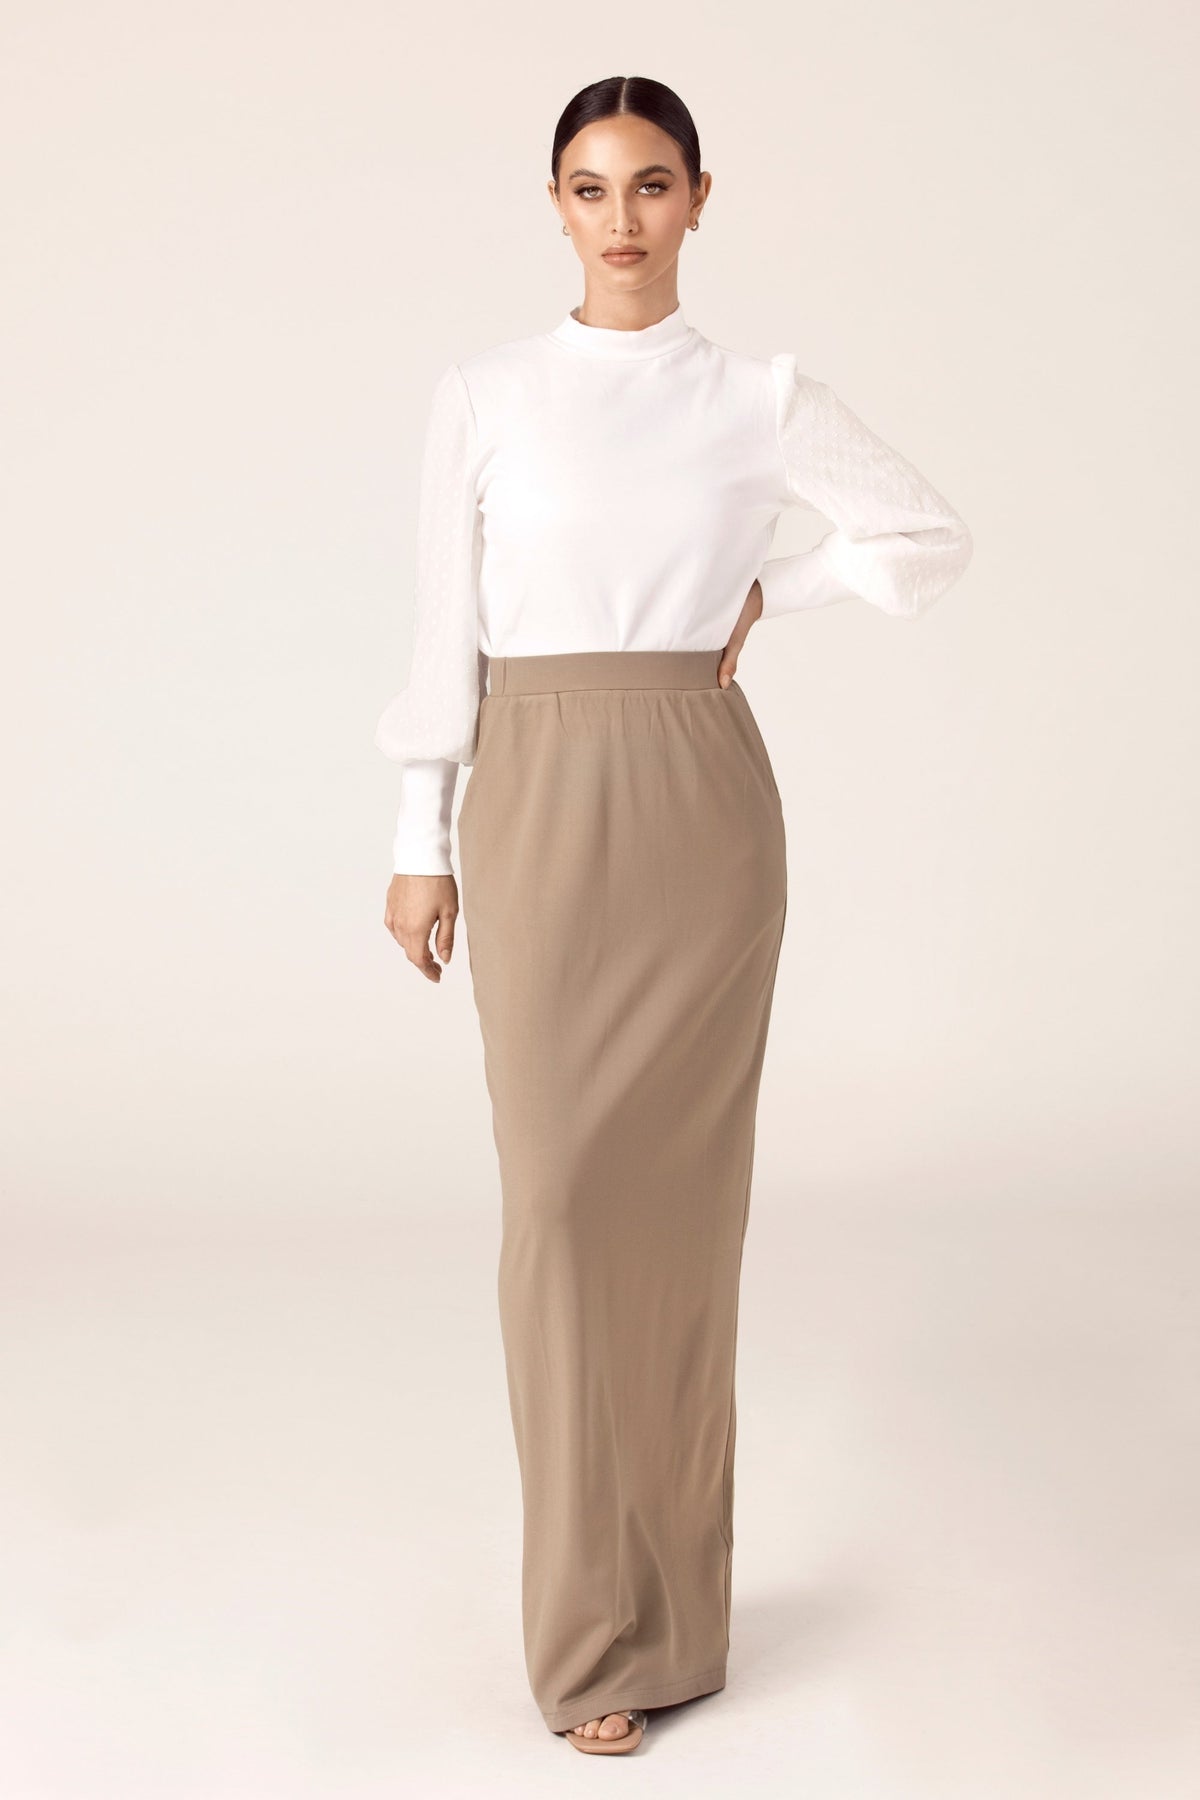 Essential Maxi Skirt - Taupe epschoolboard 